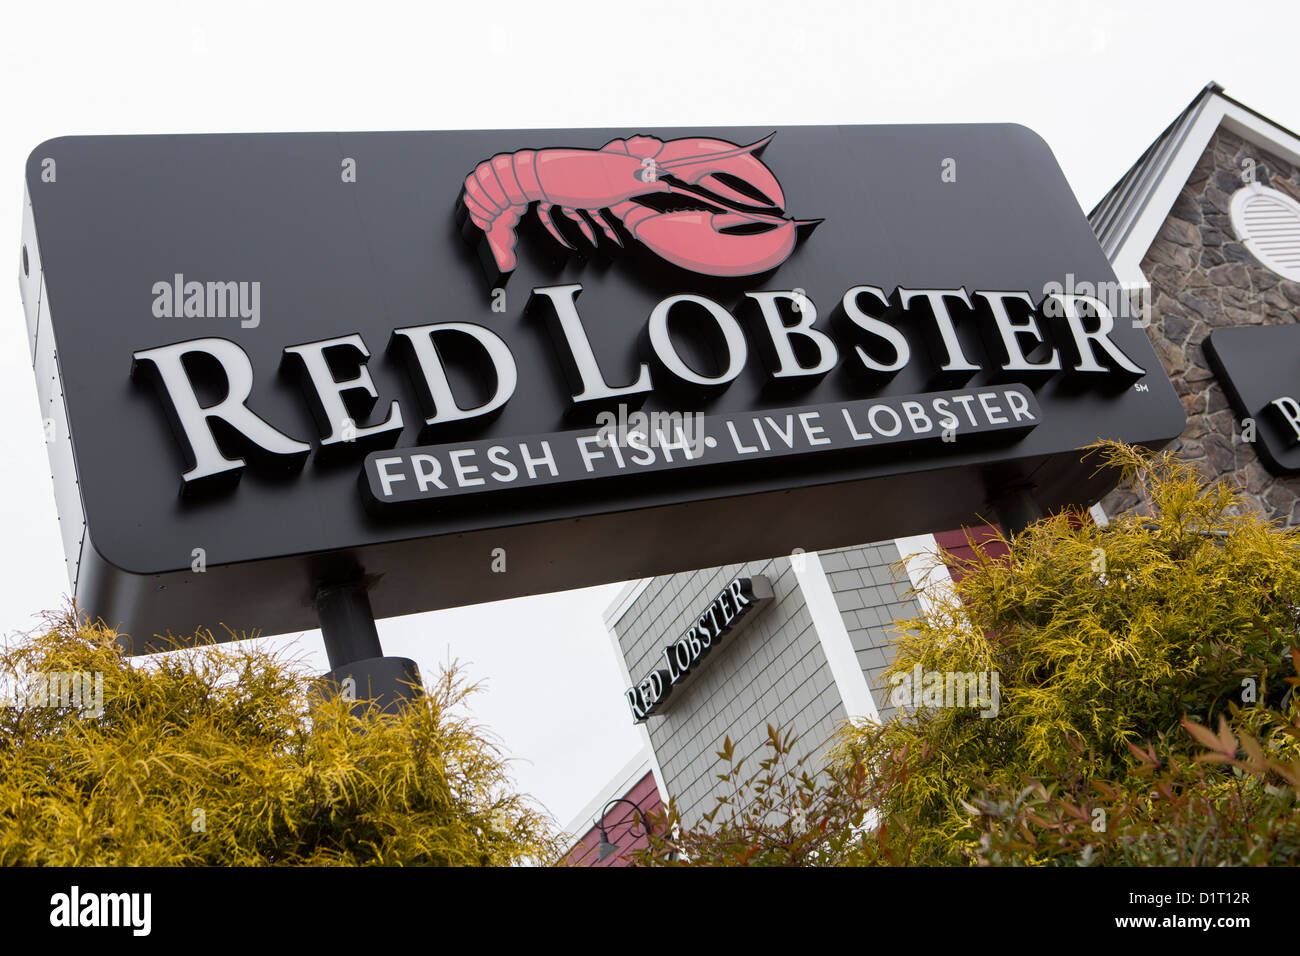 A Red Lobster seafood casual dining chain restaurant.  Stock Photo